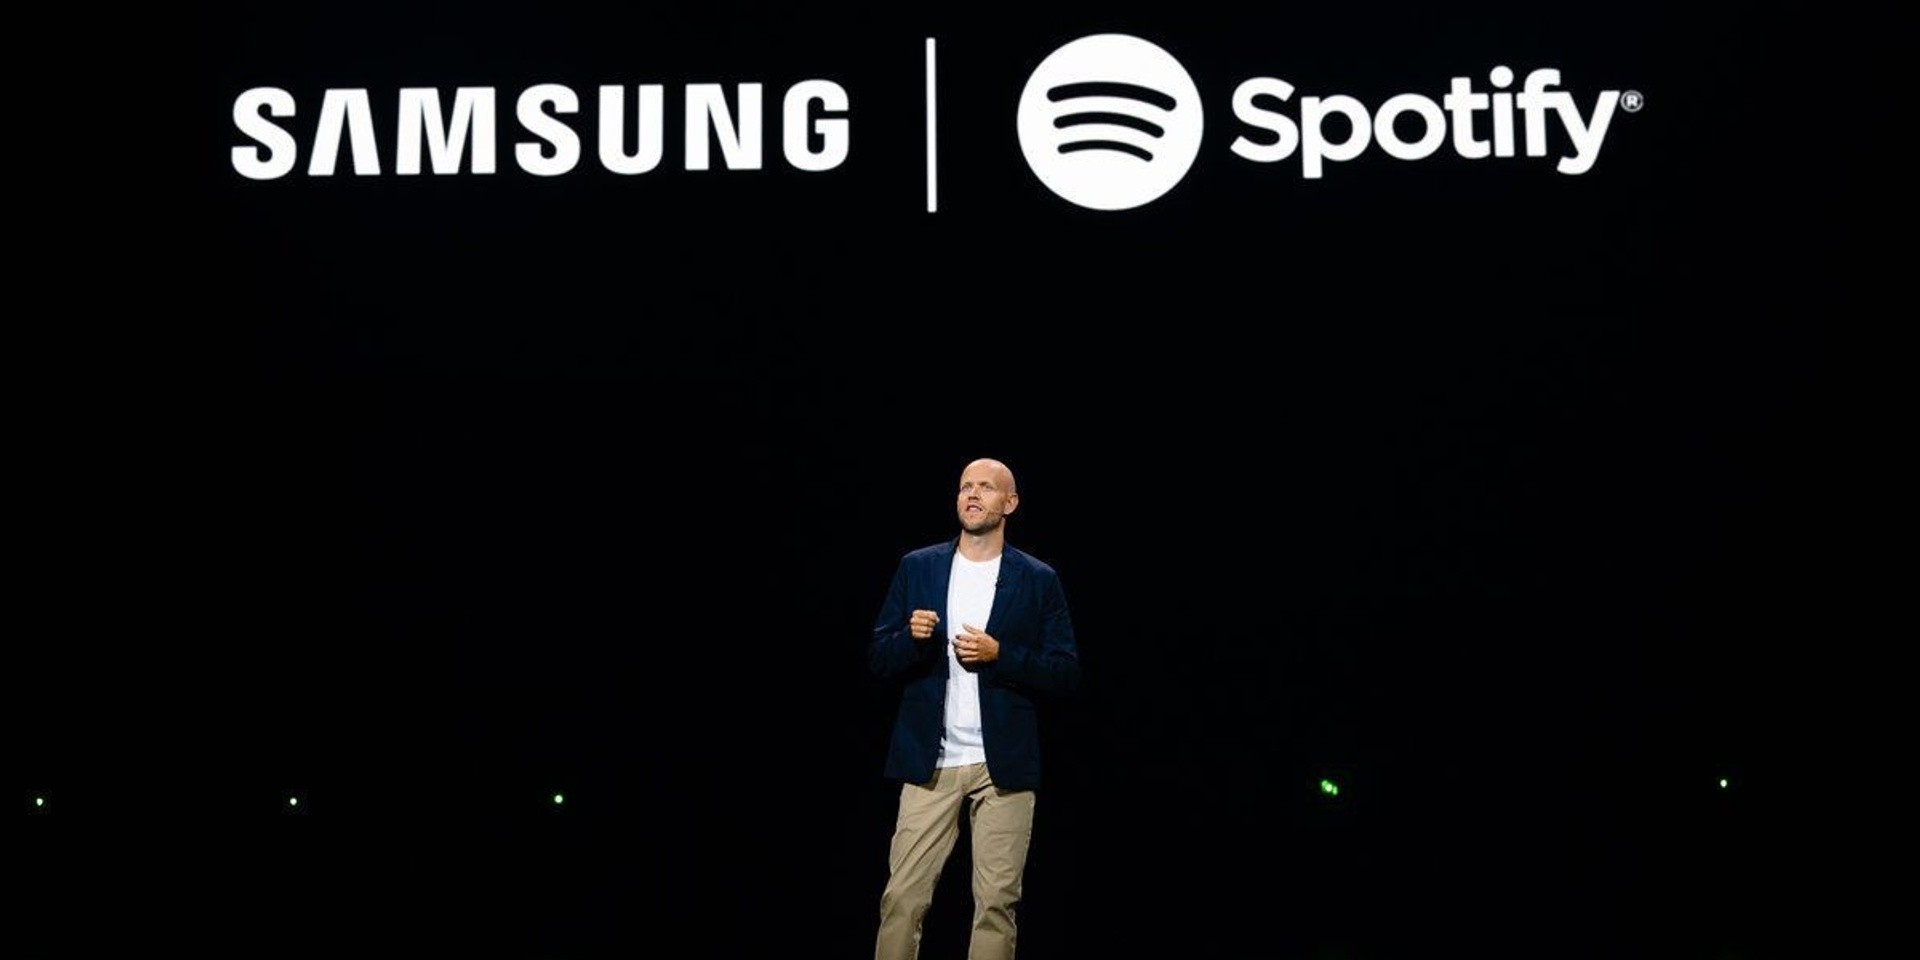 Spotify announces new partnership with Samsung